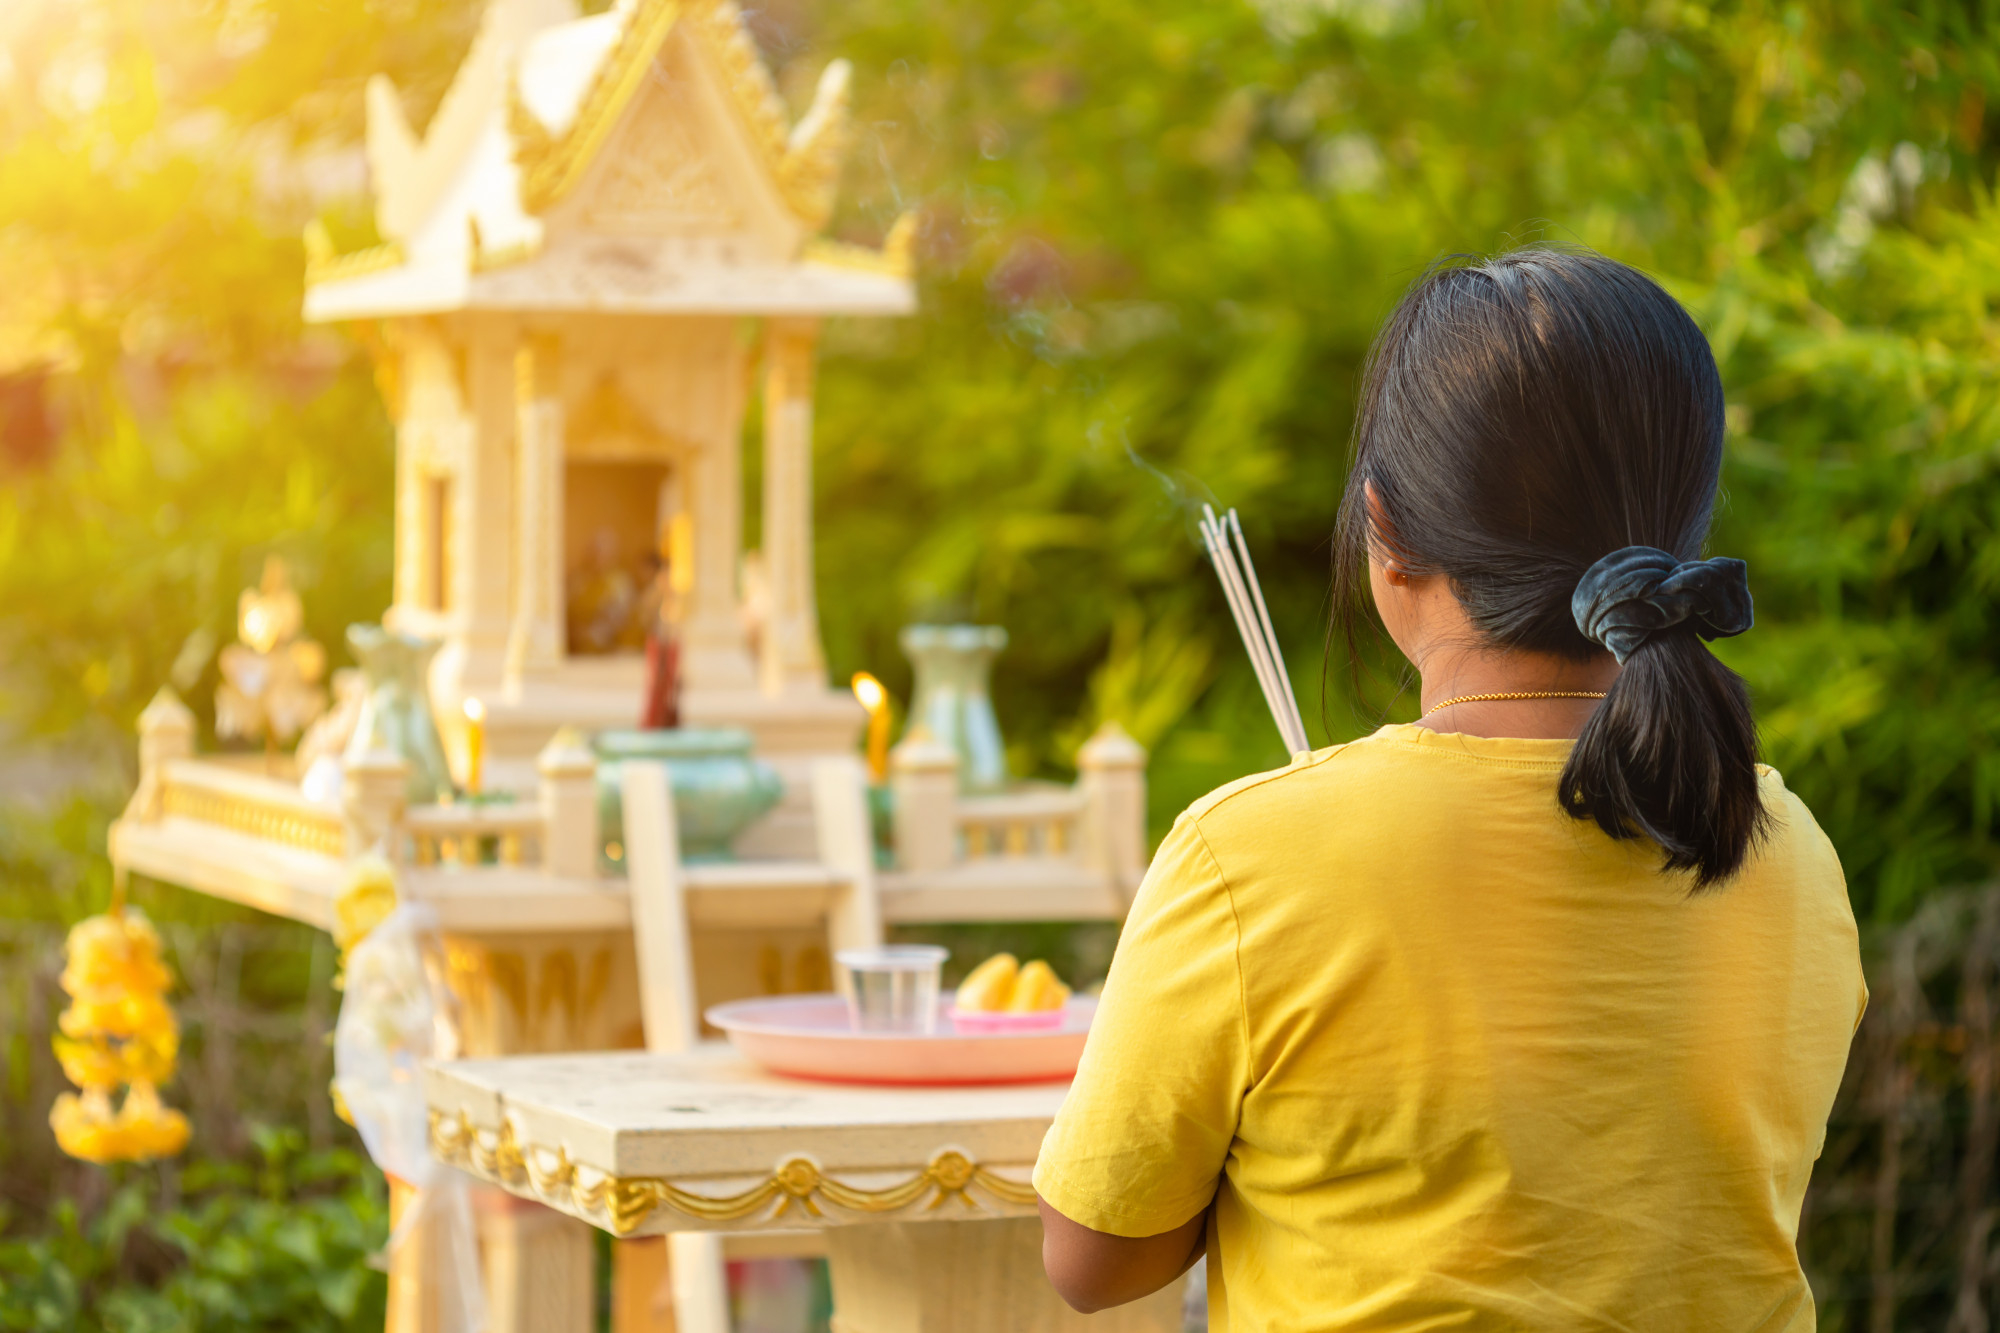 back side thai woman standing front joss house praying with incense